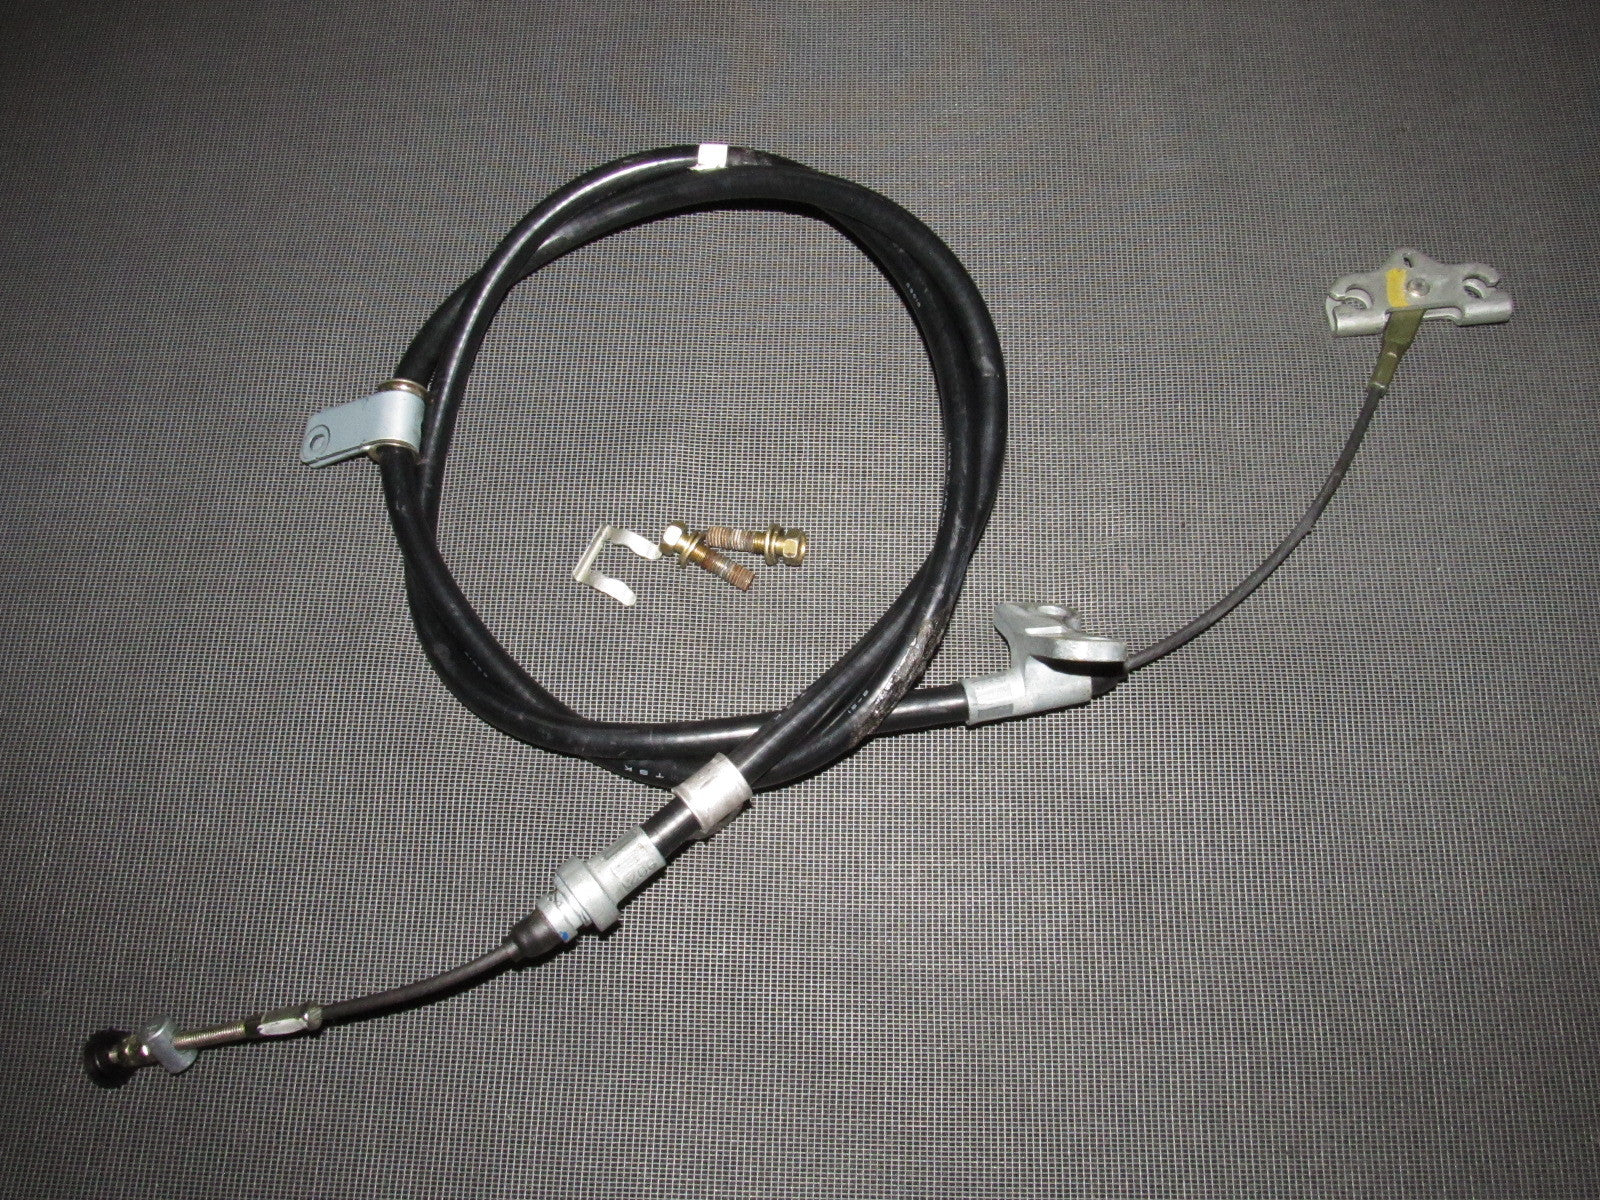 01 02 03 Acura CL OEM Intermediate Parking Cable